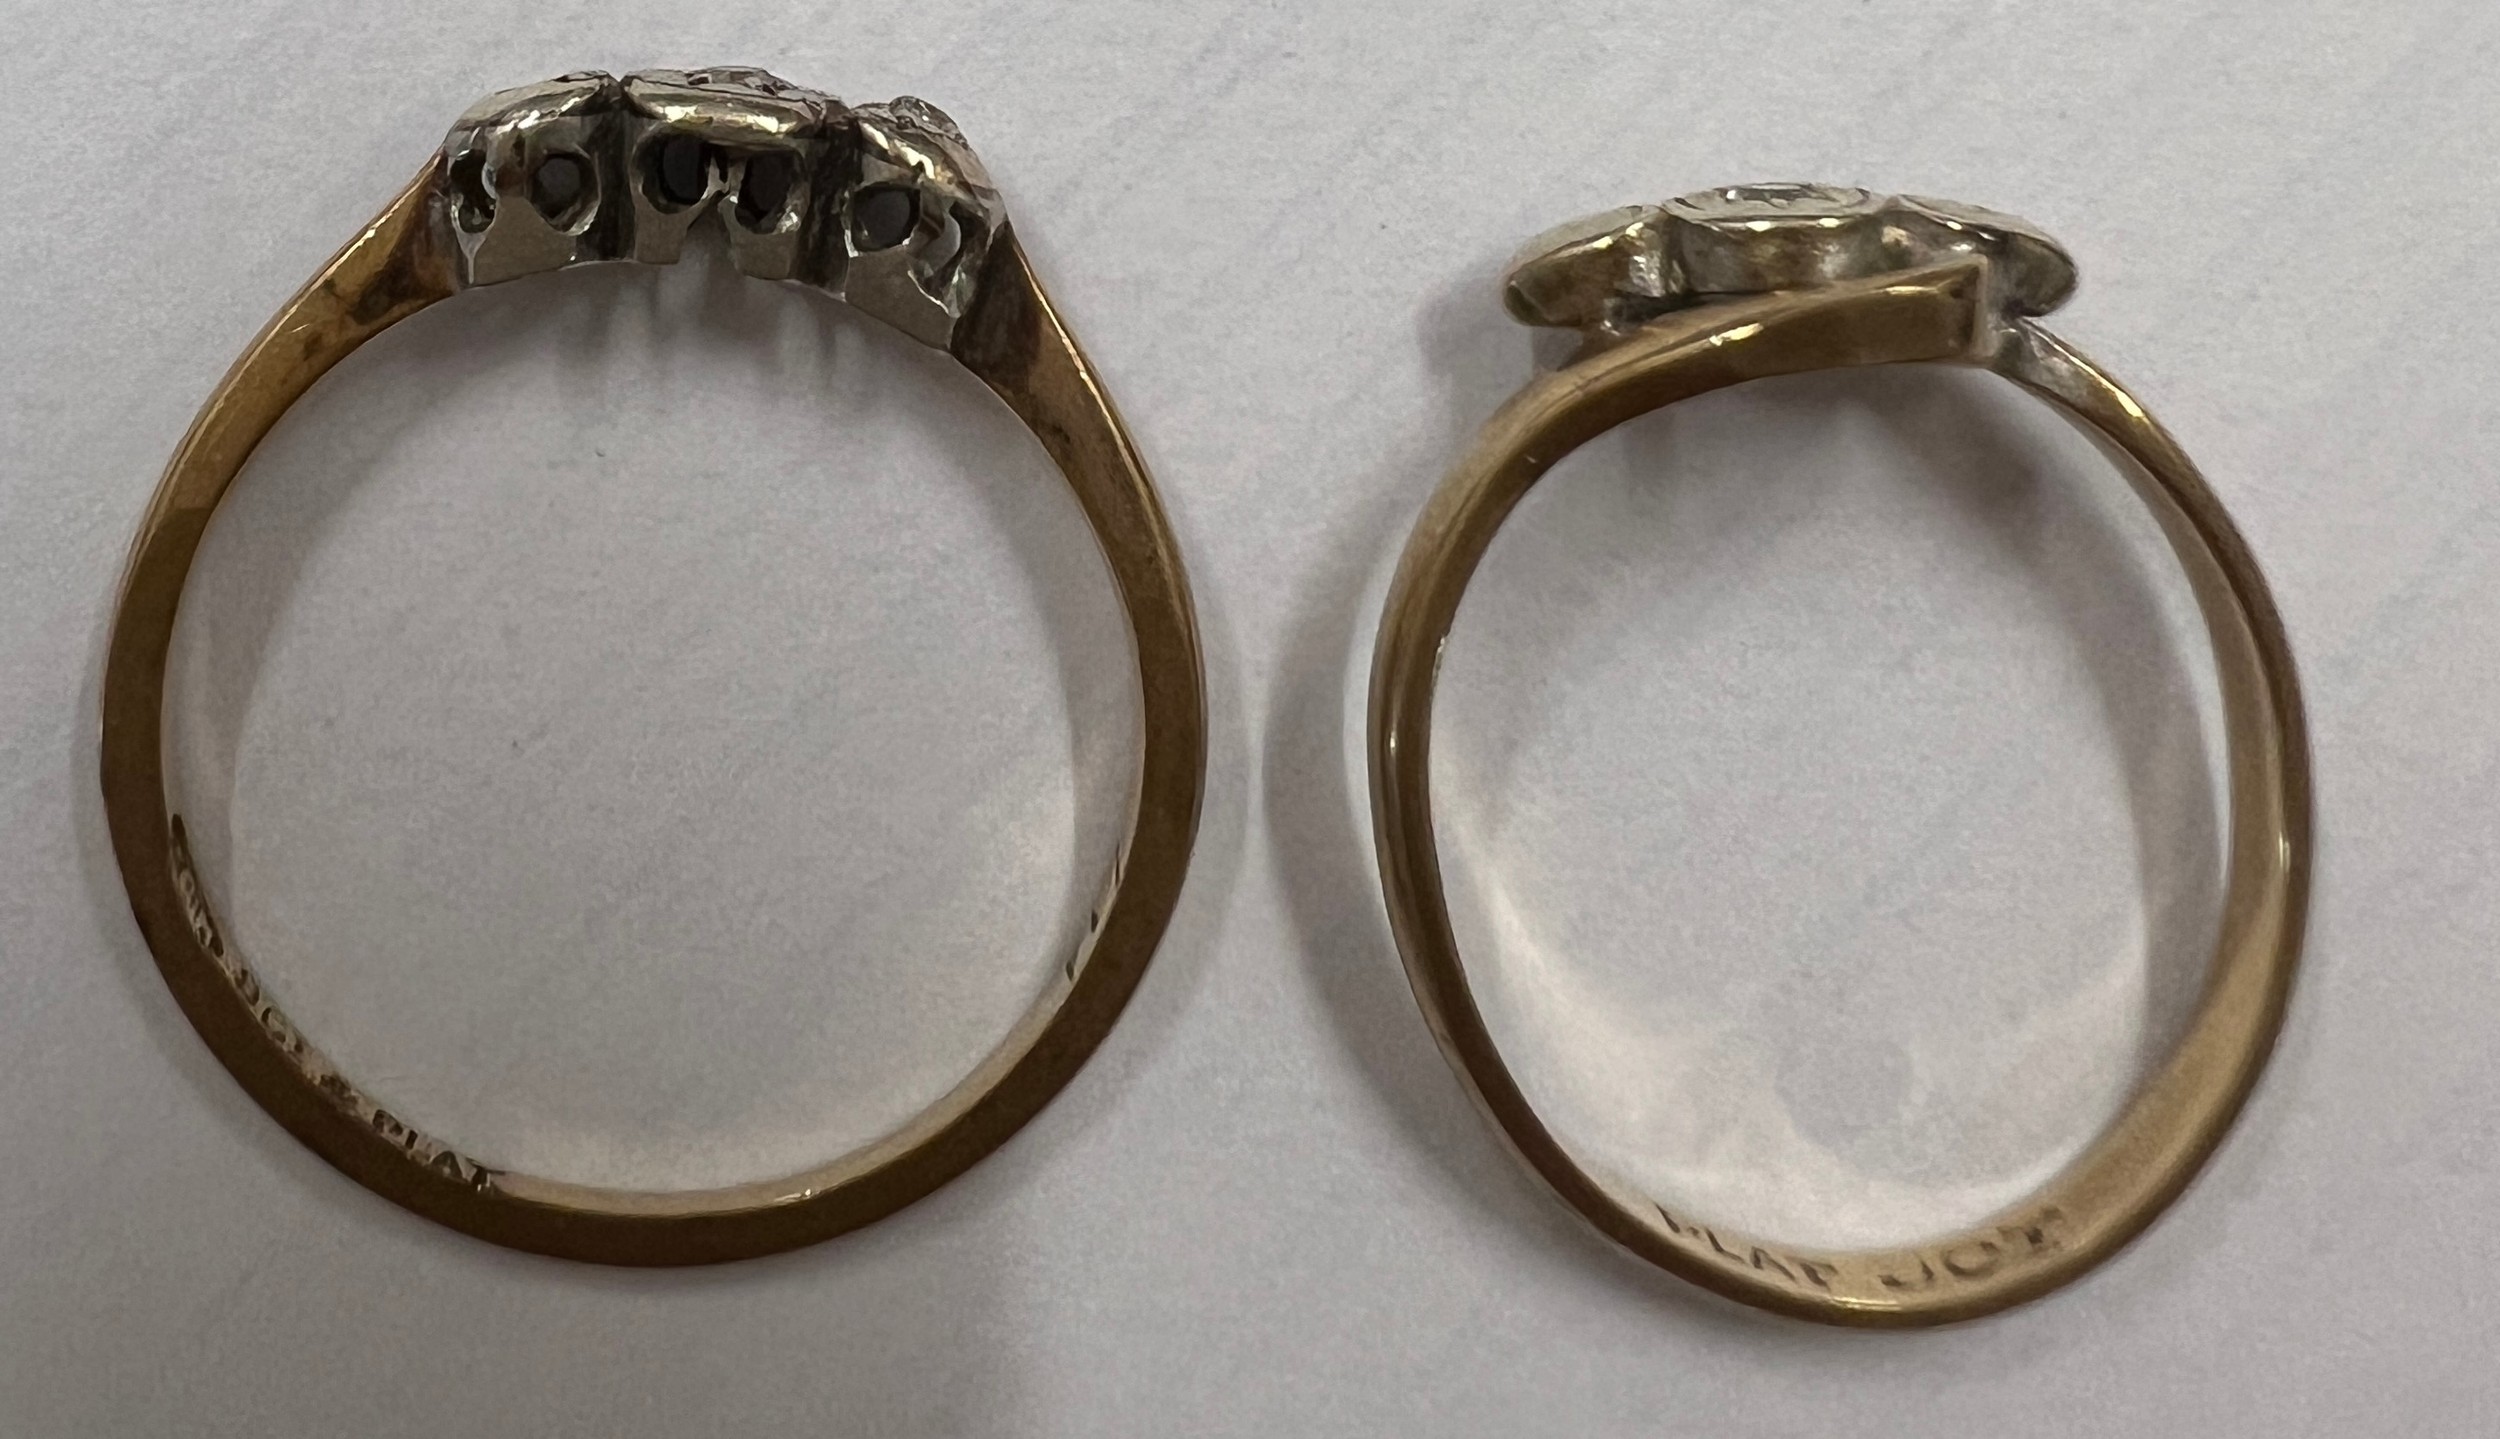 Two 9 carat gold and platinum rings set with diamond chips. 2.9gm total weight. - Image 2 of 4